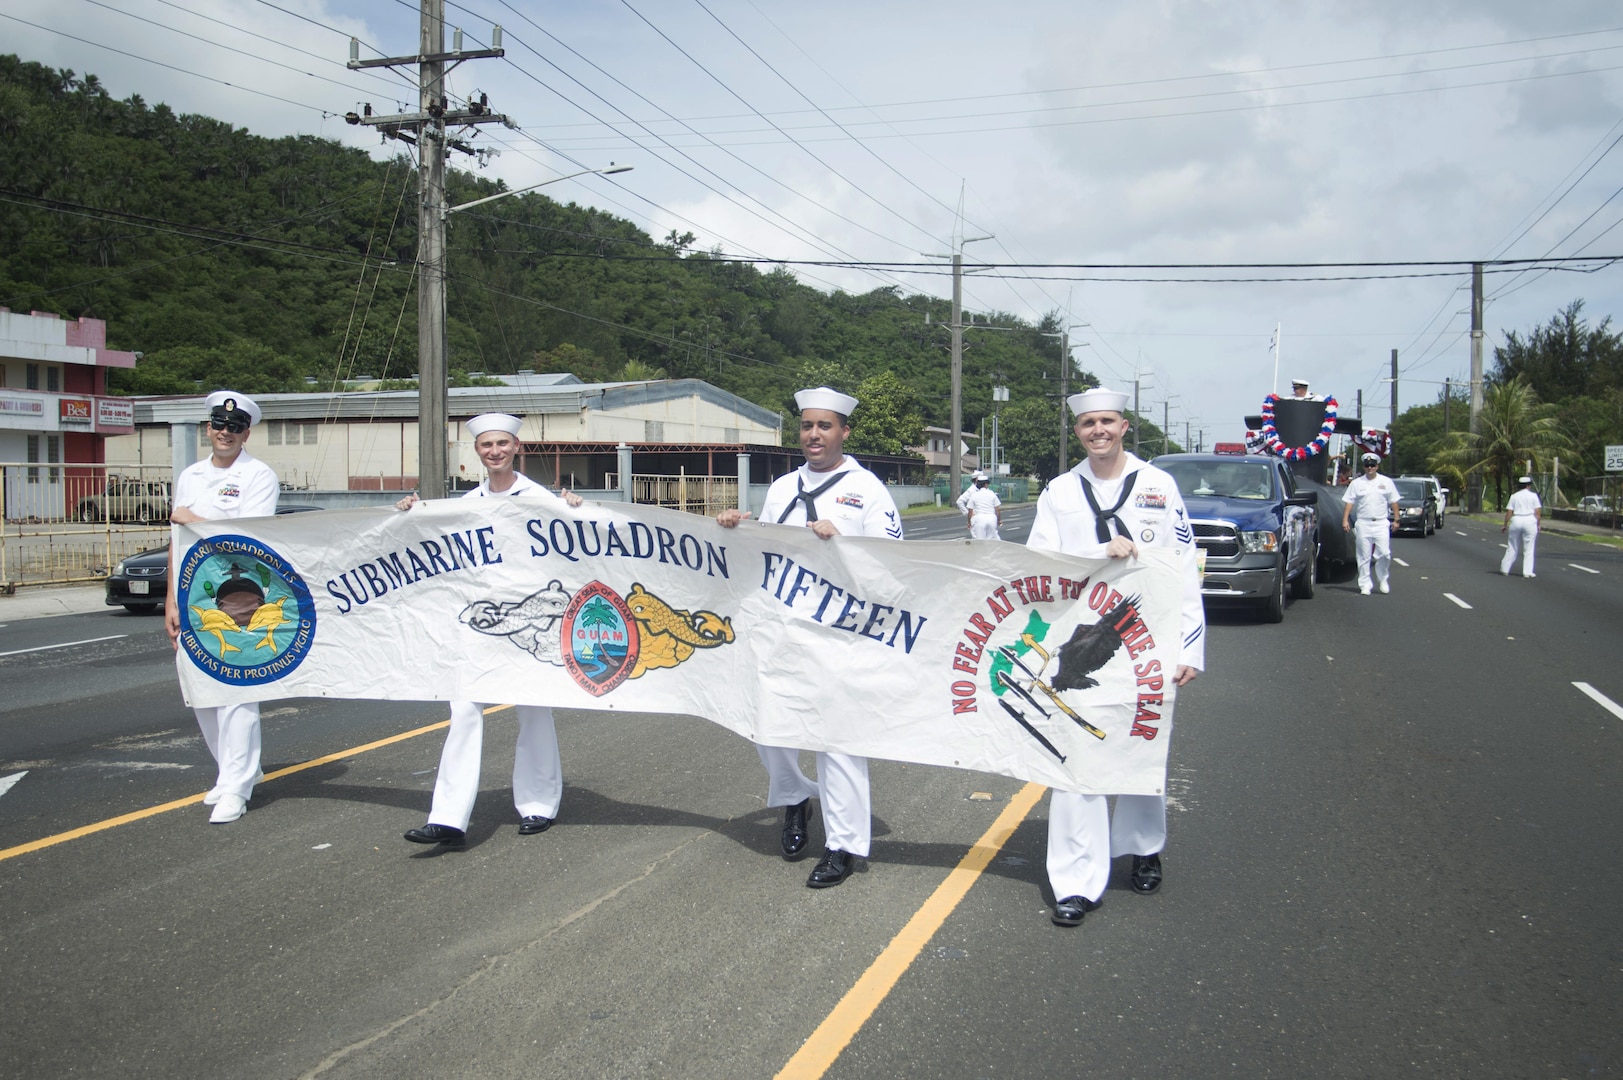 170721-N-JN506-028 HAGATNA, Guam (July 21, 2017) – Sailors from Commander, Submarine Squadron 15 carry a banner during Guam's annual Liberation Day Parade in Hagatna, Guam, July 21. The 2017 Guam Liberation Parade celebrates the 73rd anniversary of the liberation of Guam from Japanese occupation by U.S. forces during World War II. (U.S. Navy photo by Mass Communication Specialist 1st Class Jamica Johnson/Released)